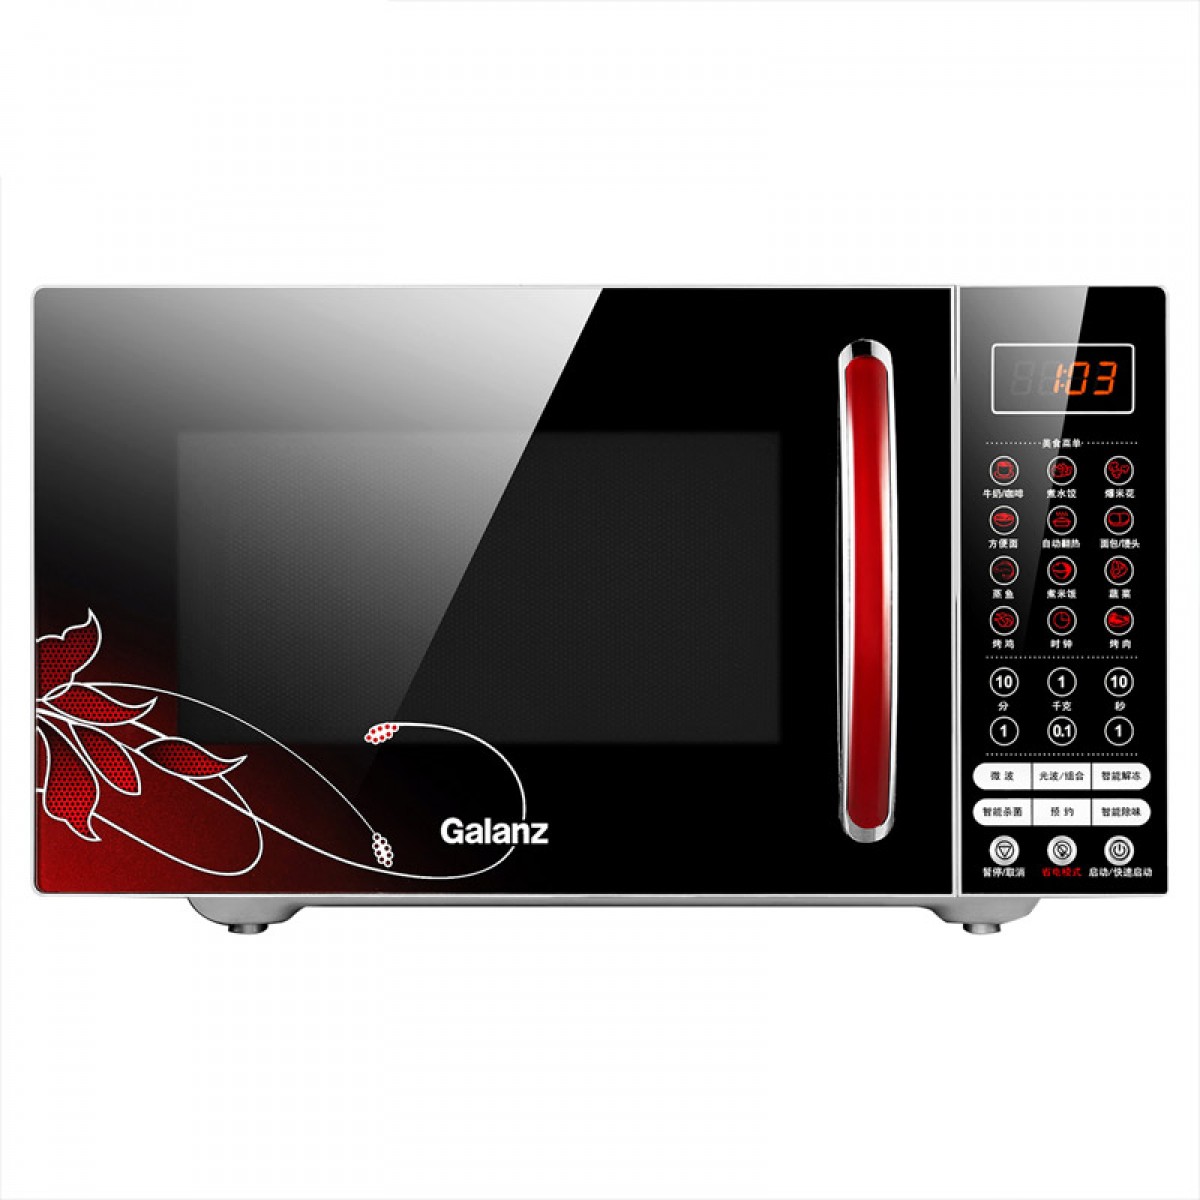 Galanz / Galanz g80f23cn3l-c2 (R0) genuine microwave oven 23L intelligent light wave oven